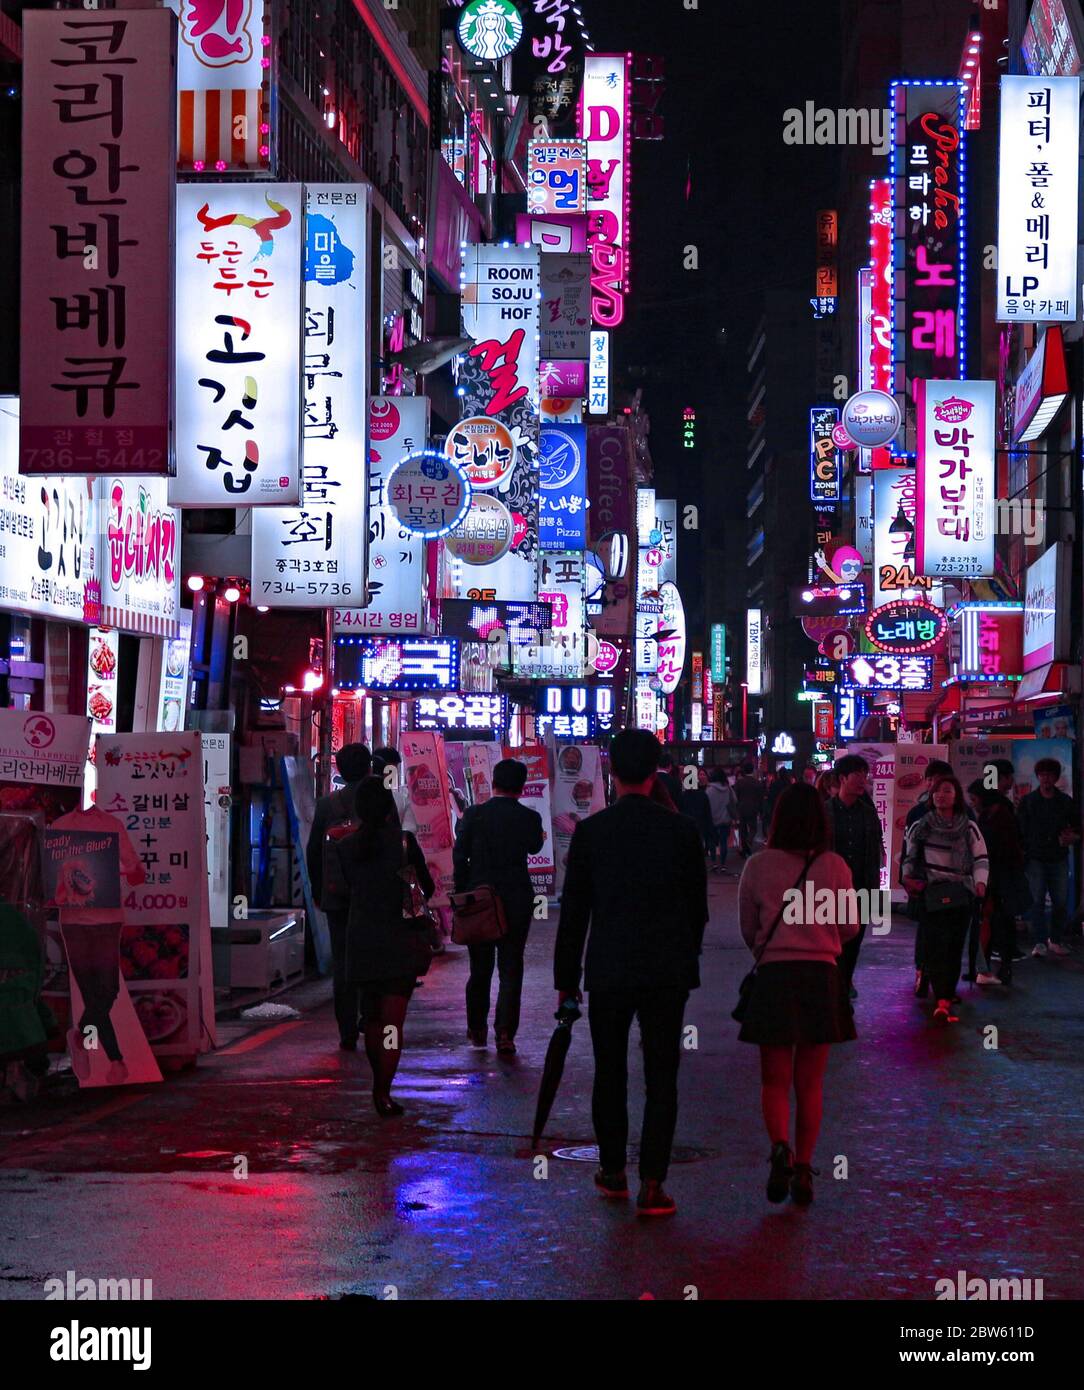 A rainy night walking down one of the shopping streets with neon shop signs of Myeong dong, Seoul, South Korea Stock Photo